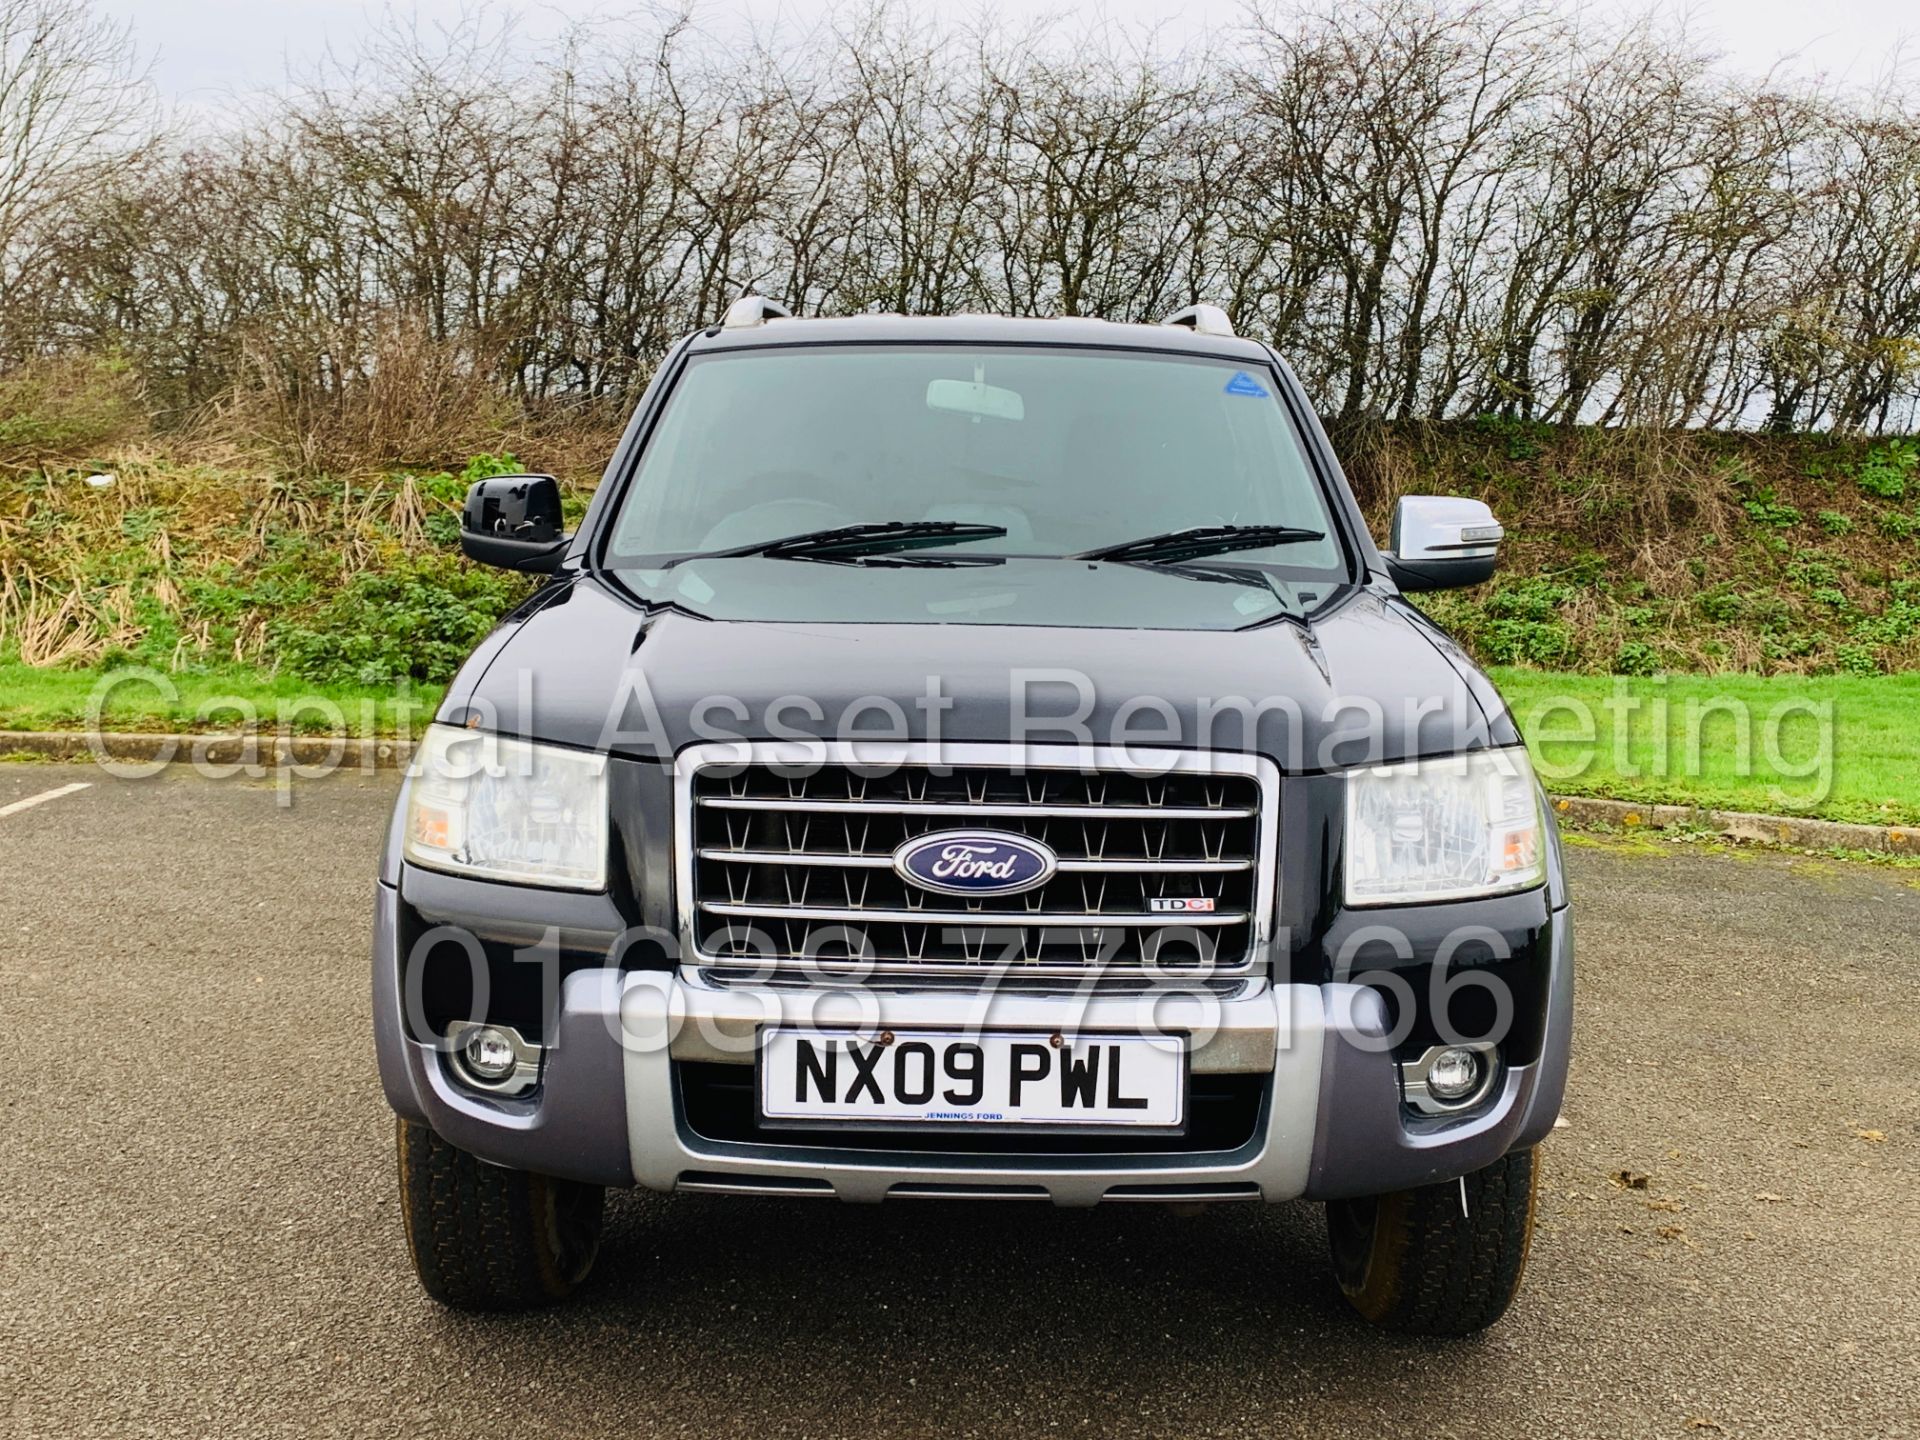 FORD RANGER *WILDTRAK* DOUBLE CAB PICK-UP *4X4* (2009) '3.0 TDCI - 156 BHP* (FULLY LOADED) - Image 4 of 37